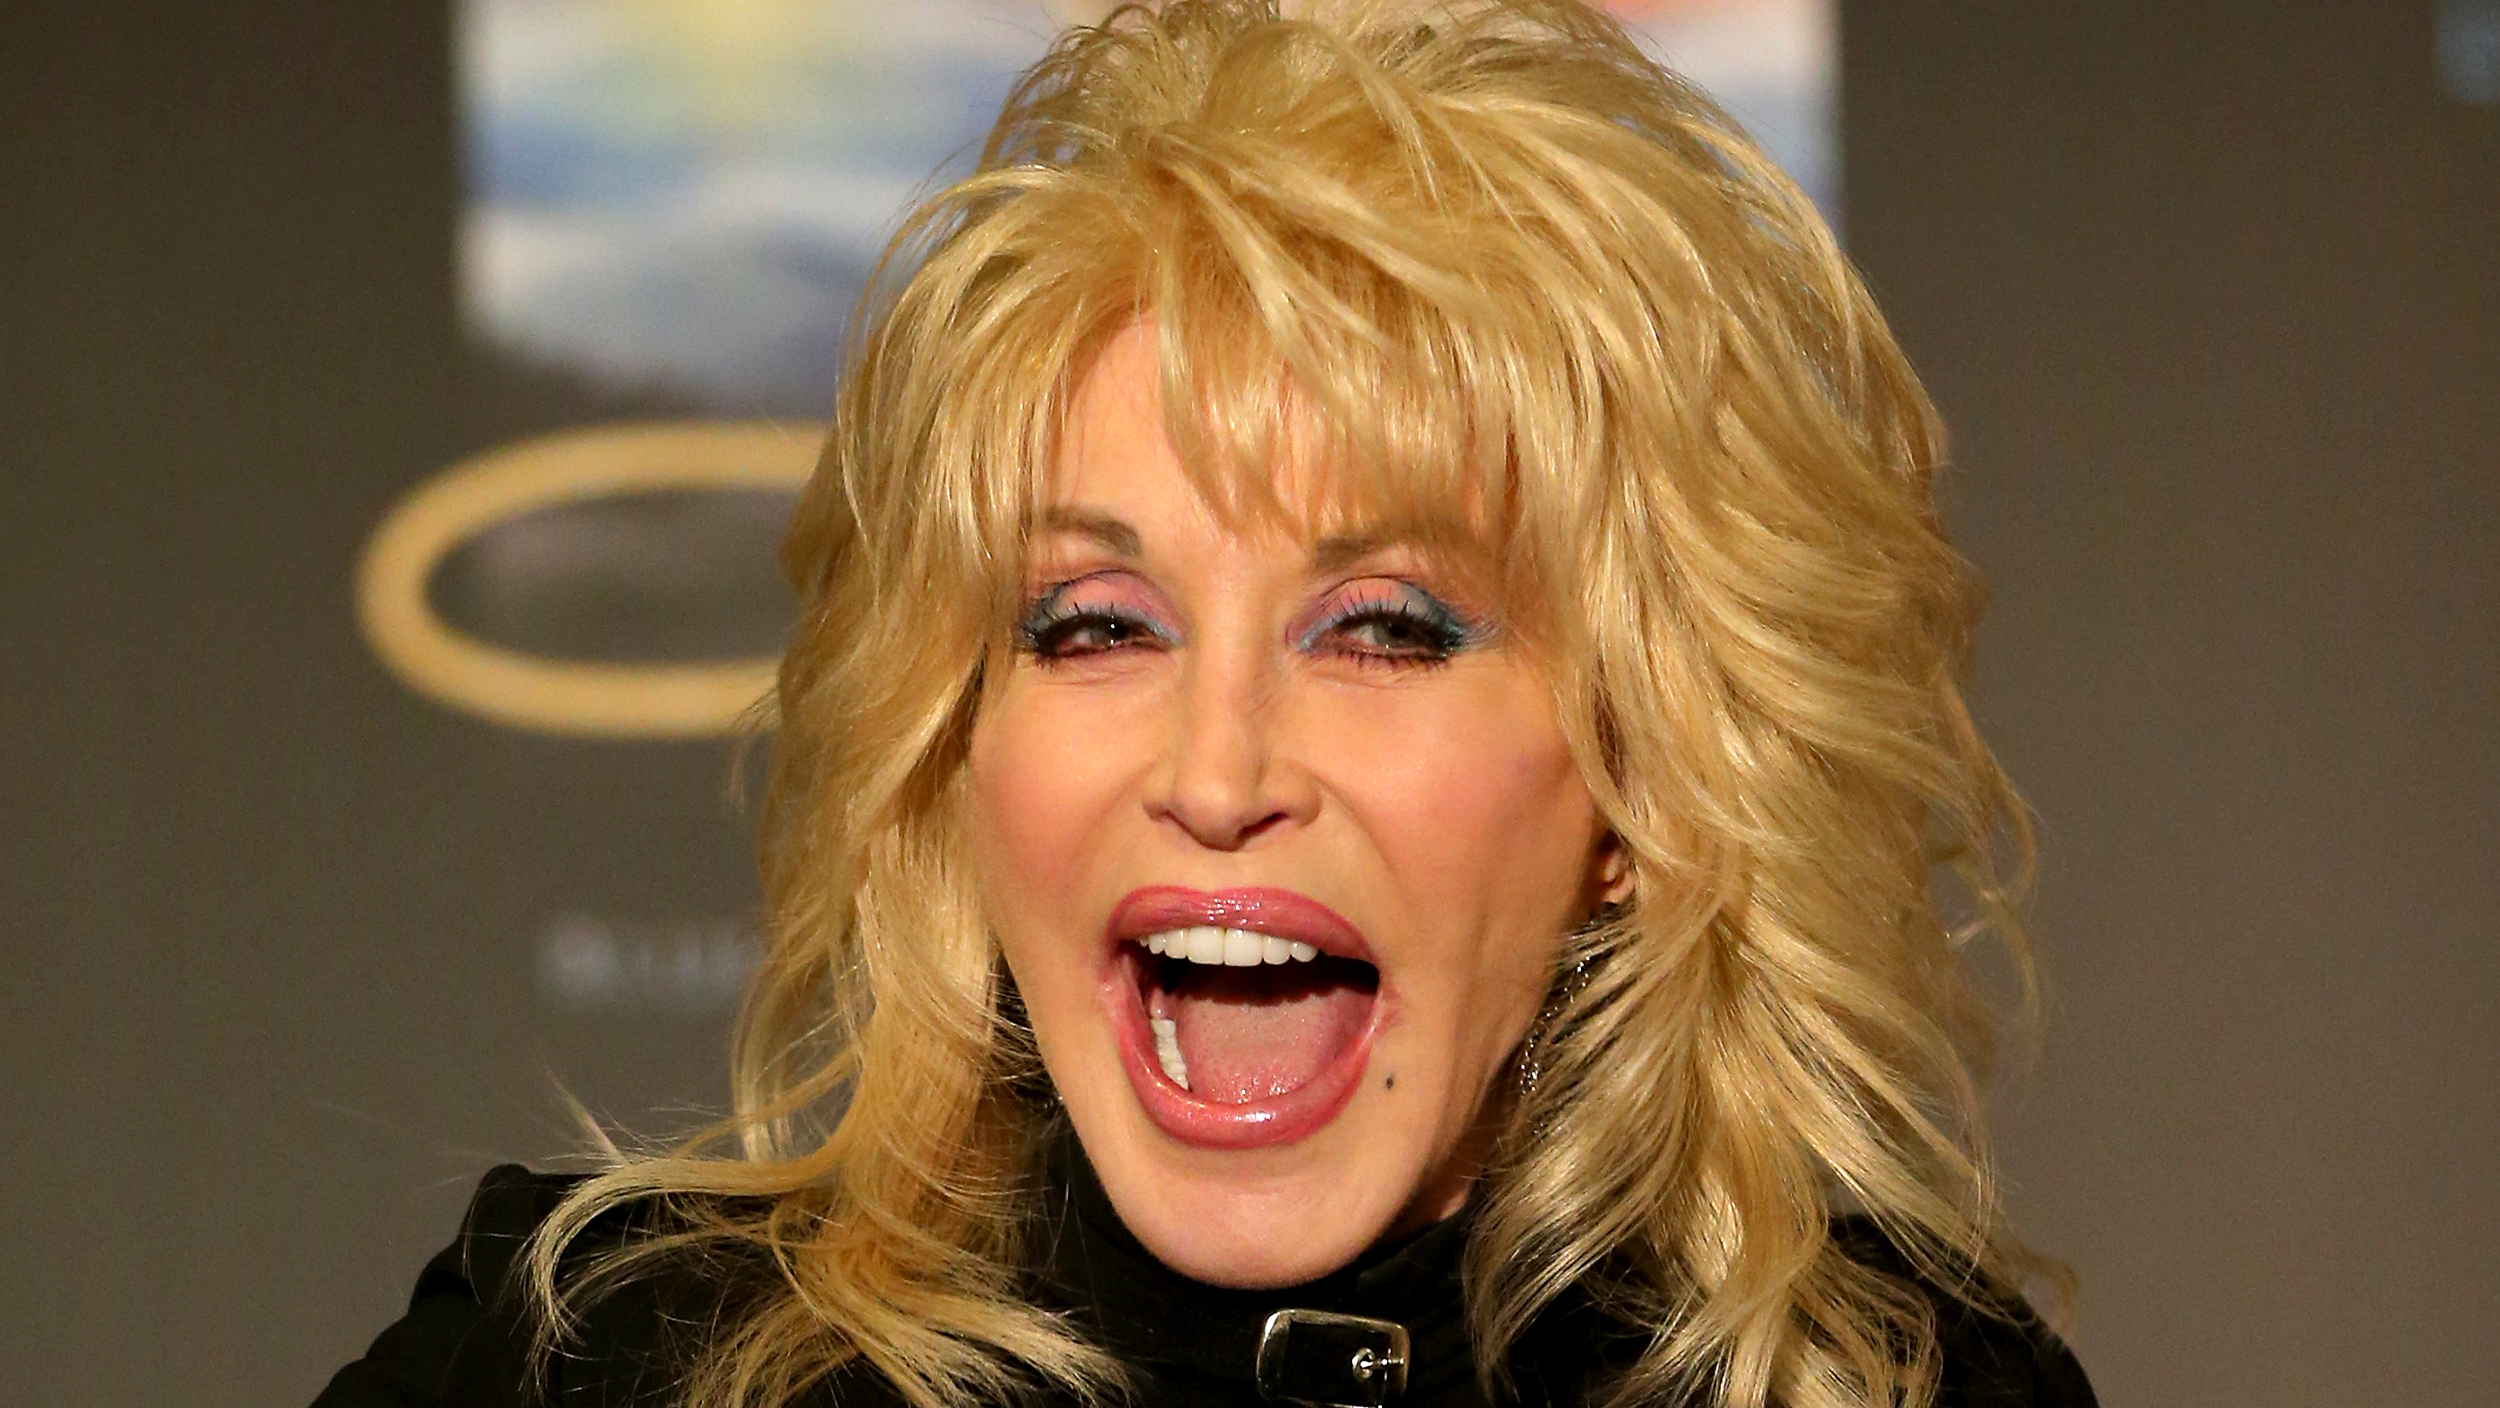 5 style lessons we can learn from Dolly Parton - TODAY.com2500 x 1408